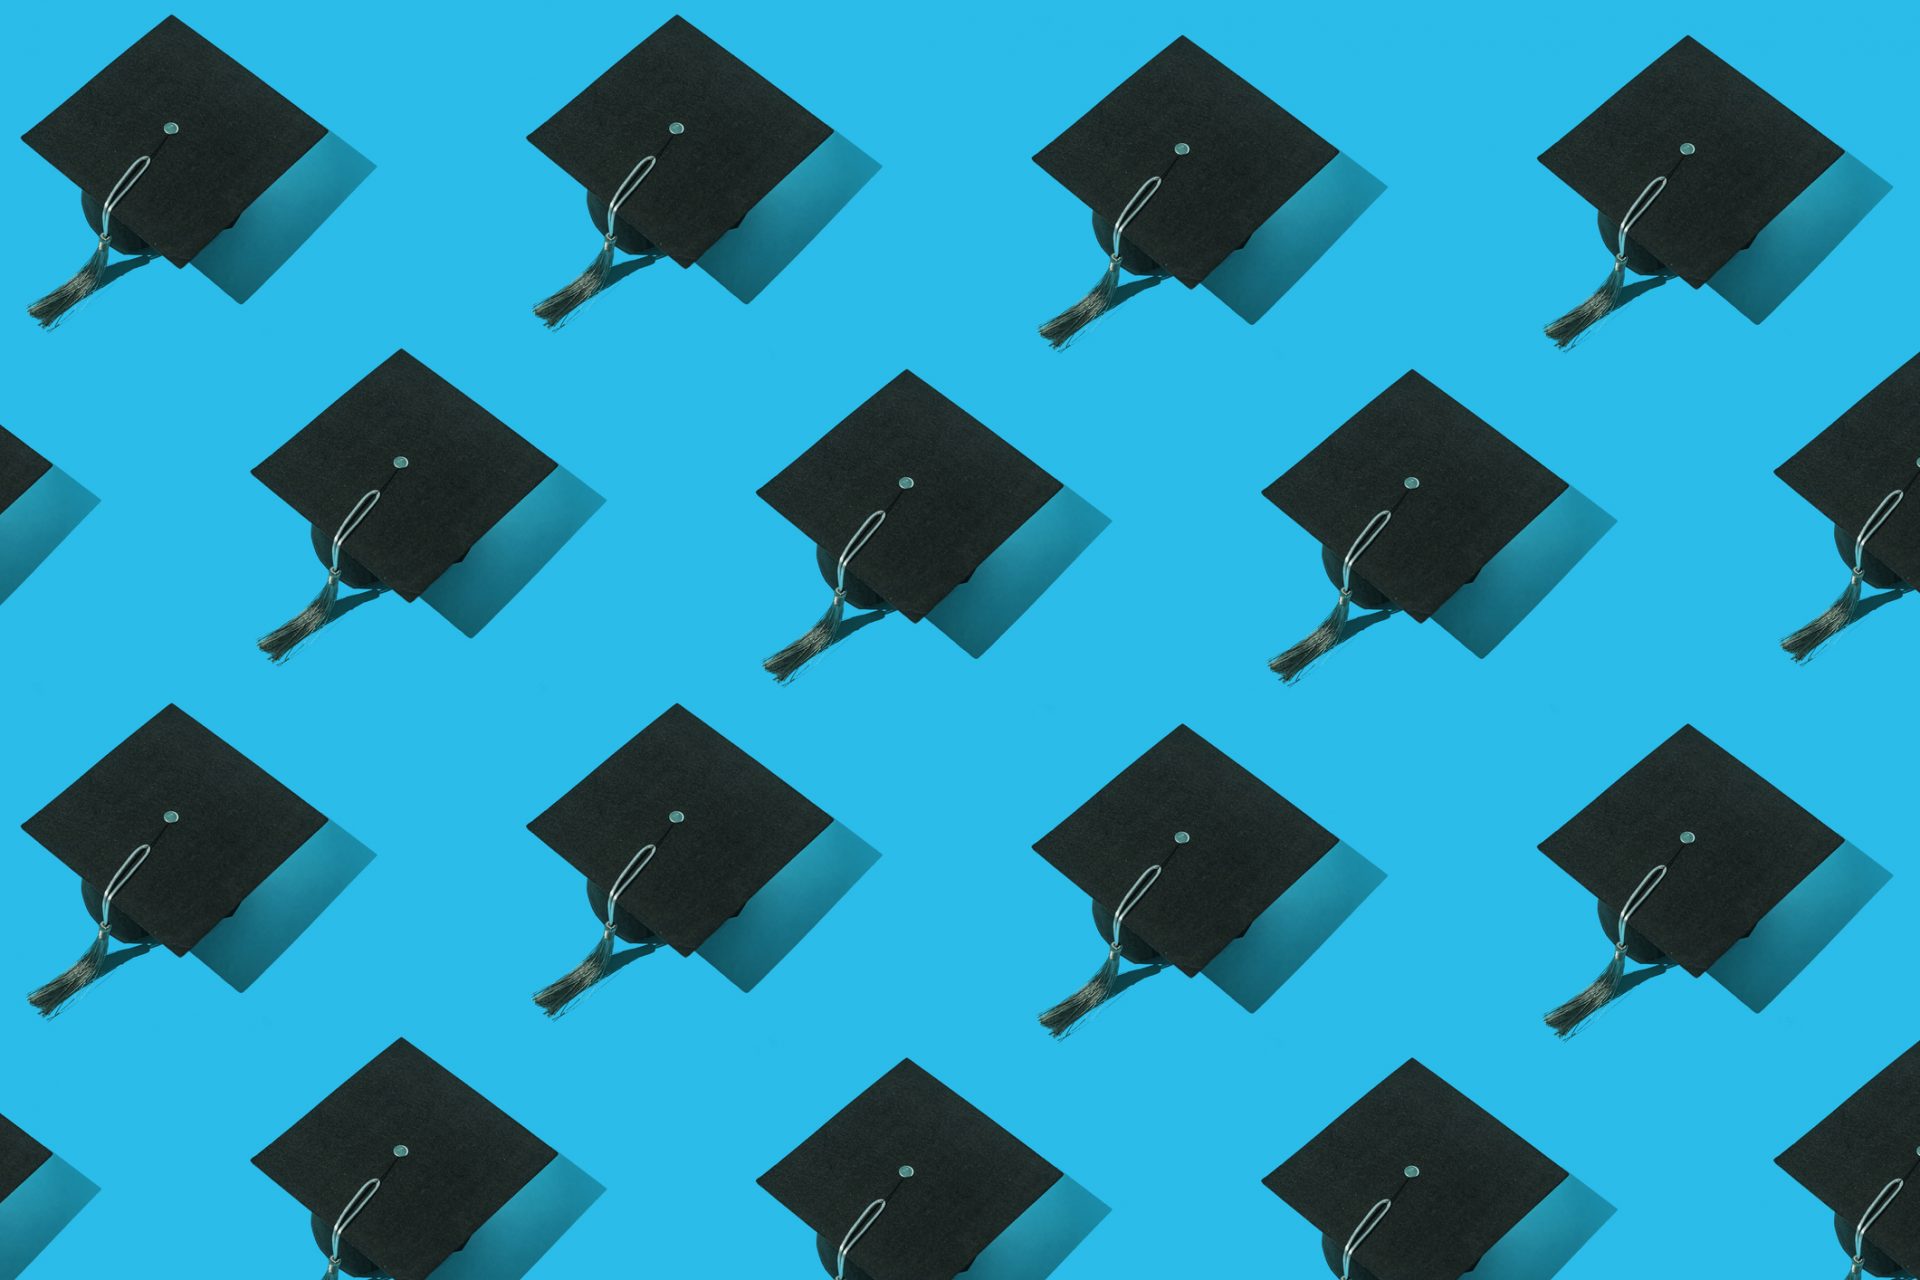 The data on some degrees might surprise you